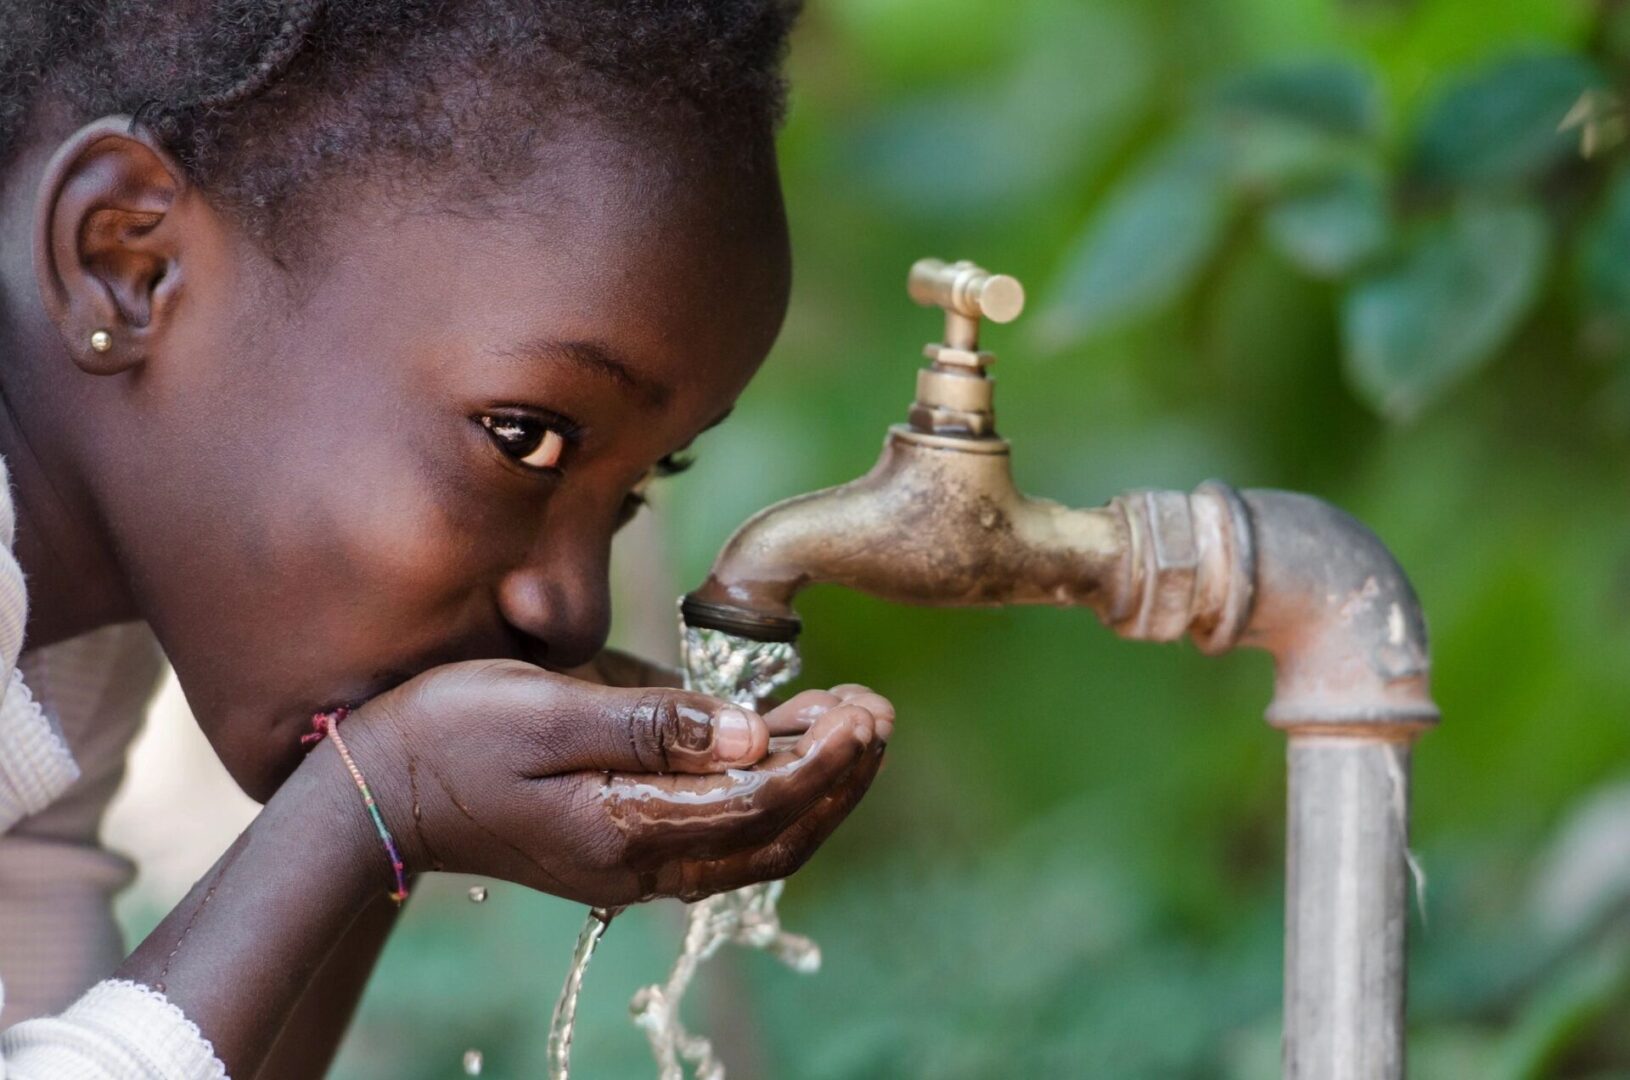 A young girl drinking water from a faucet.